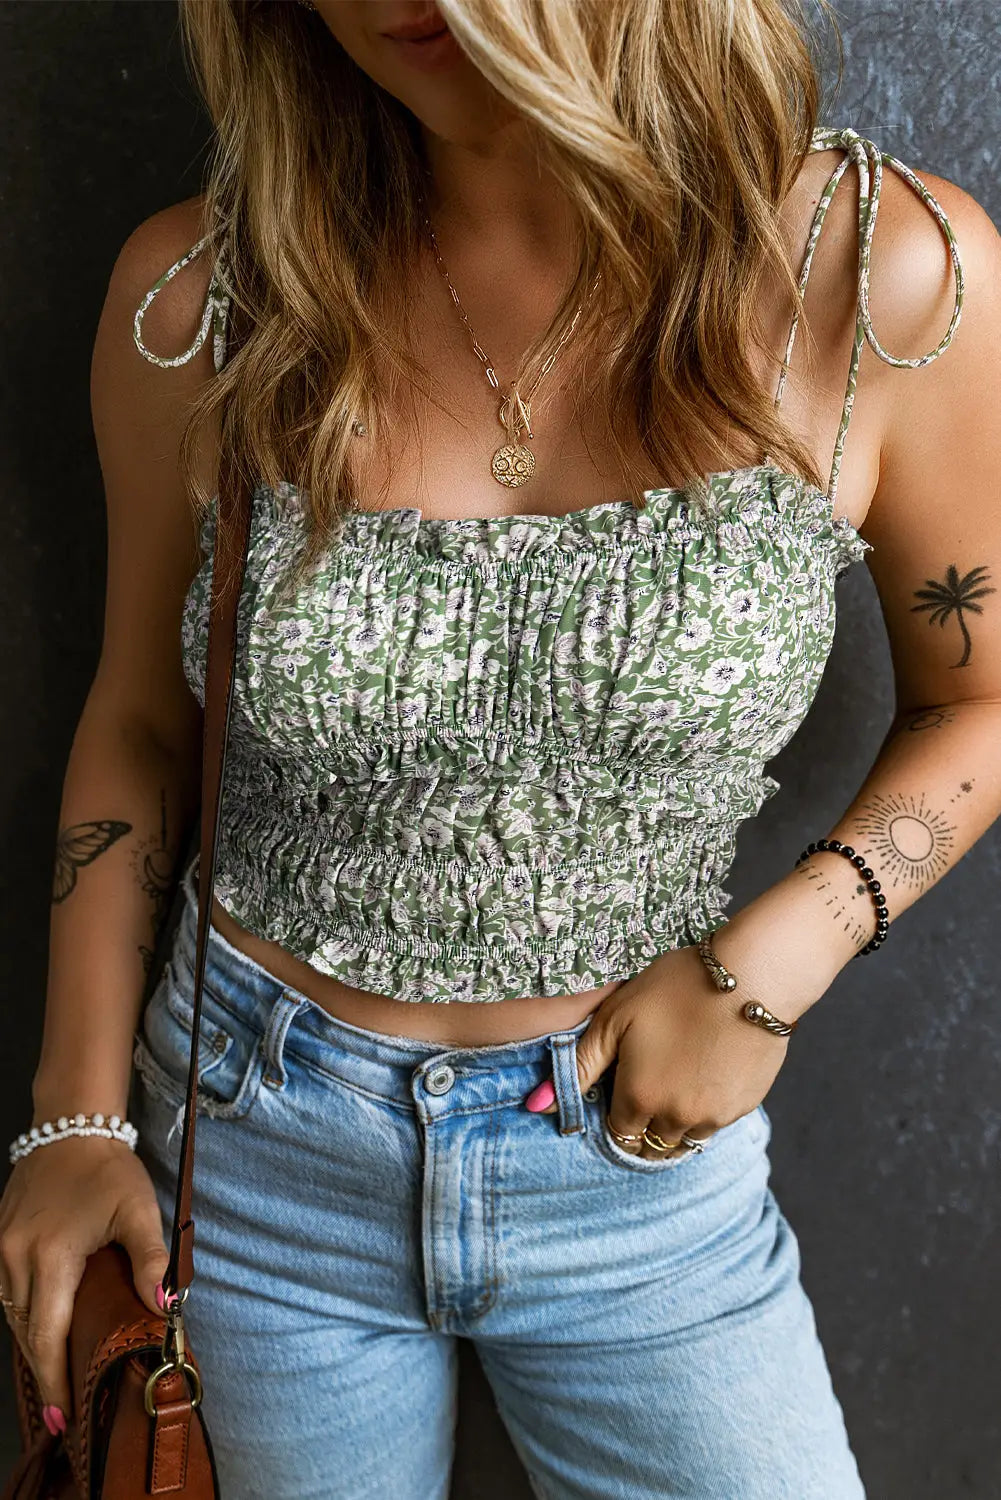 Cropped tank top - green floral spaghetti straps - s / 100% polyester - tops